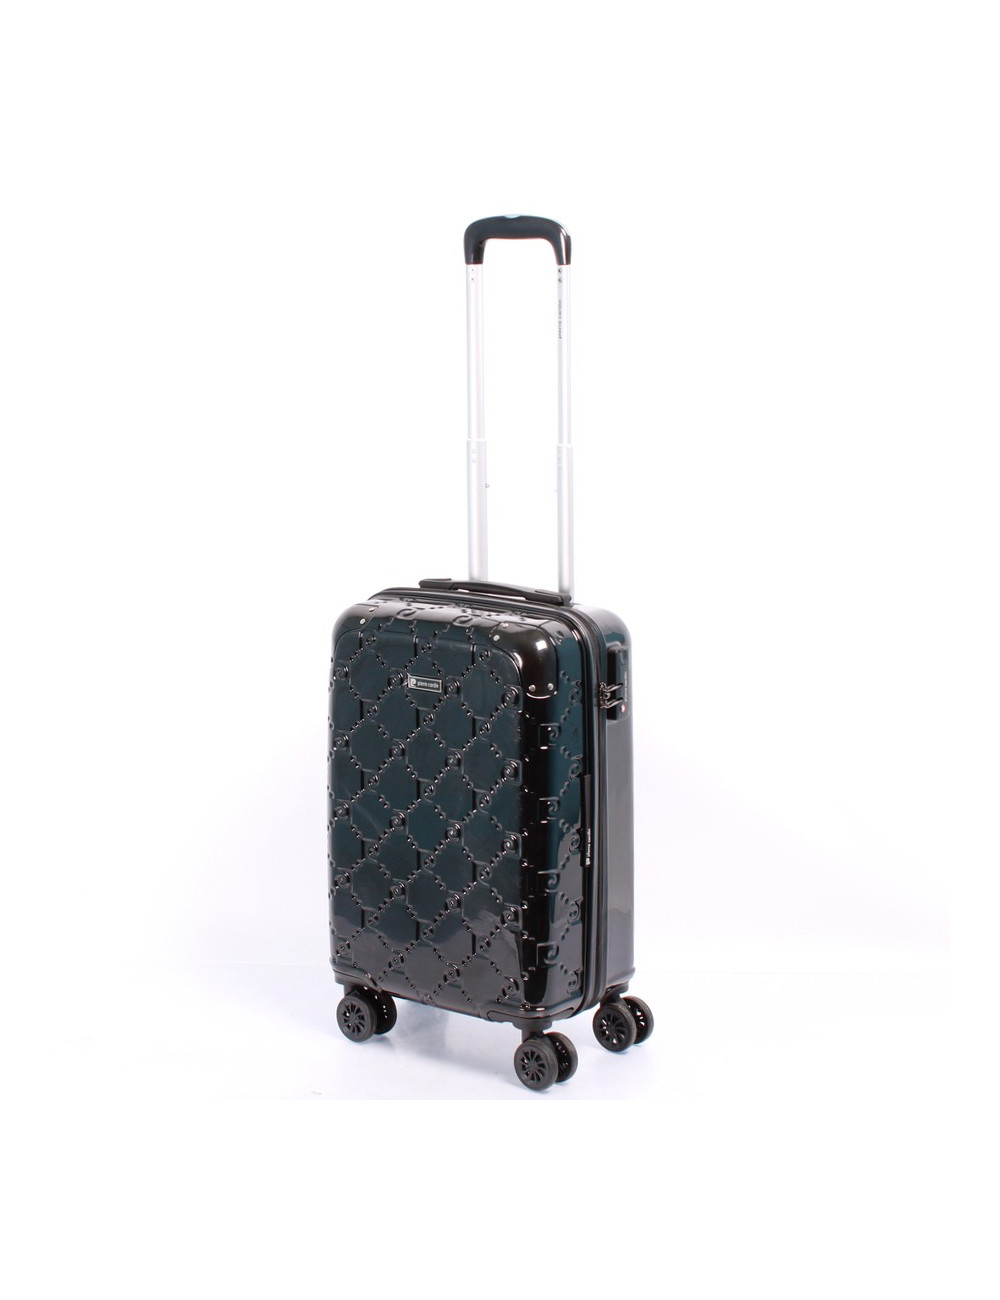 VALISE CABINE RIGIDE SAC BAGAGE A MAIN TROLLEY LOW COST AVION TRAIN 